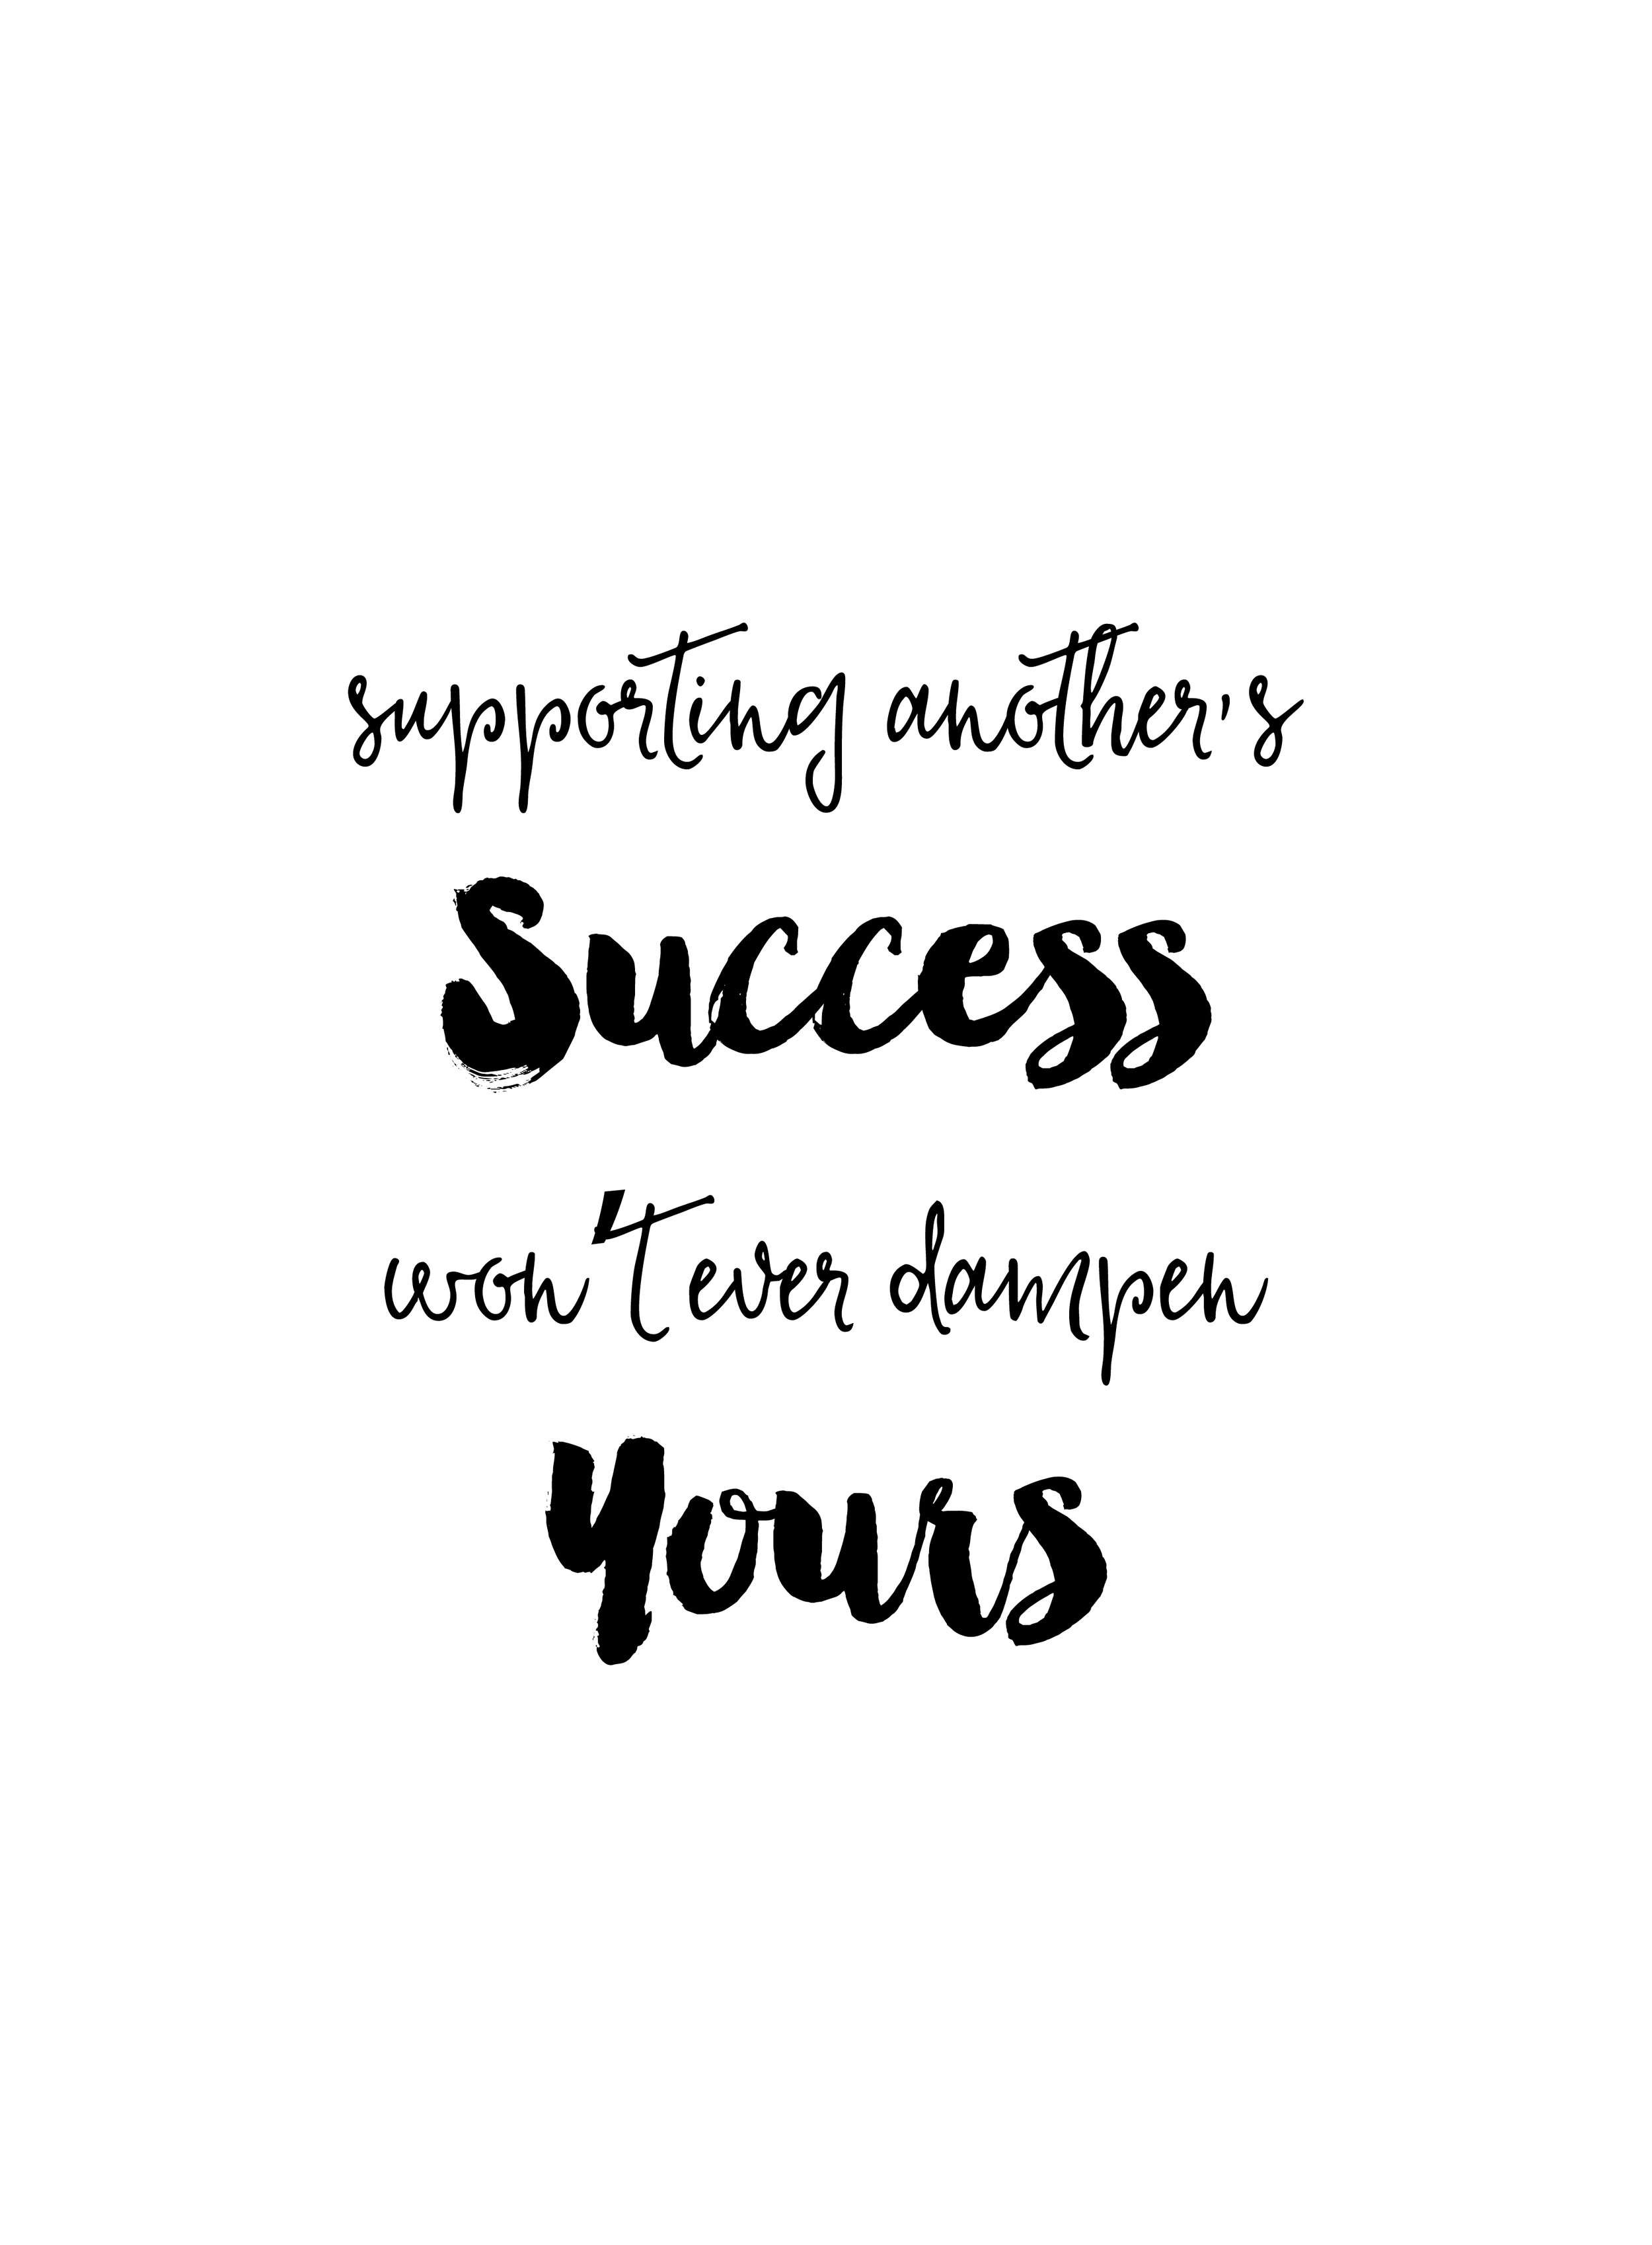 Quotes to live by: 'Supporting another's success won't ever dampen yours'  #CRcertified